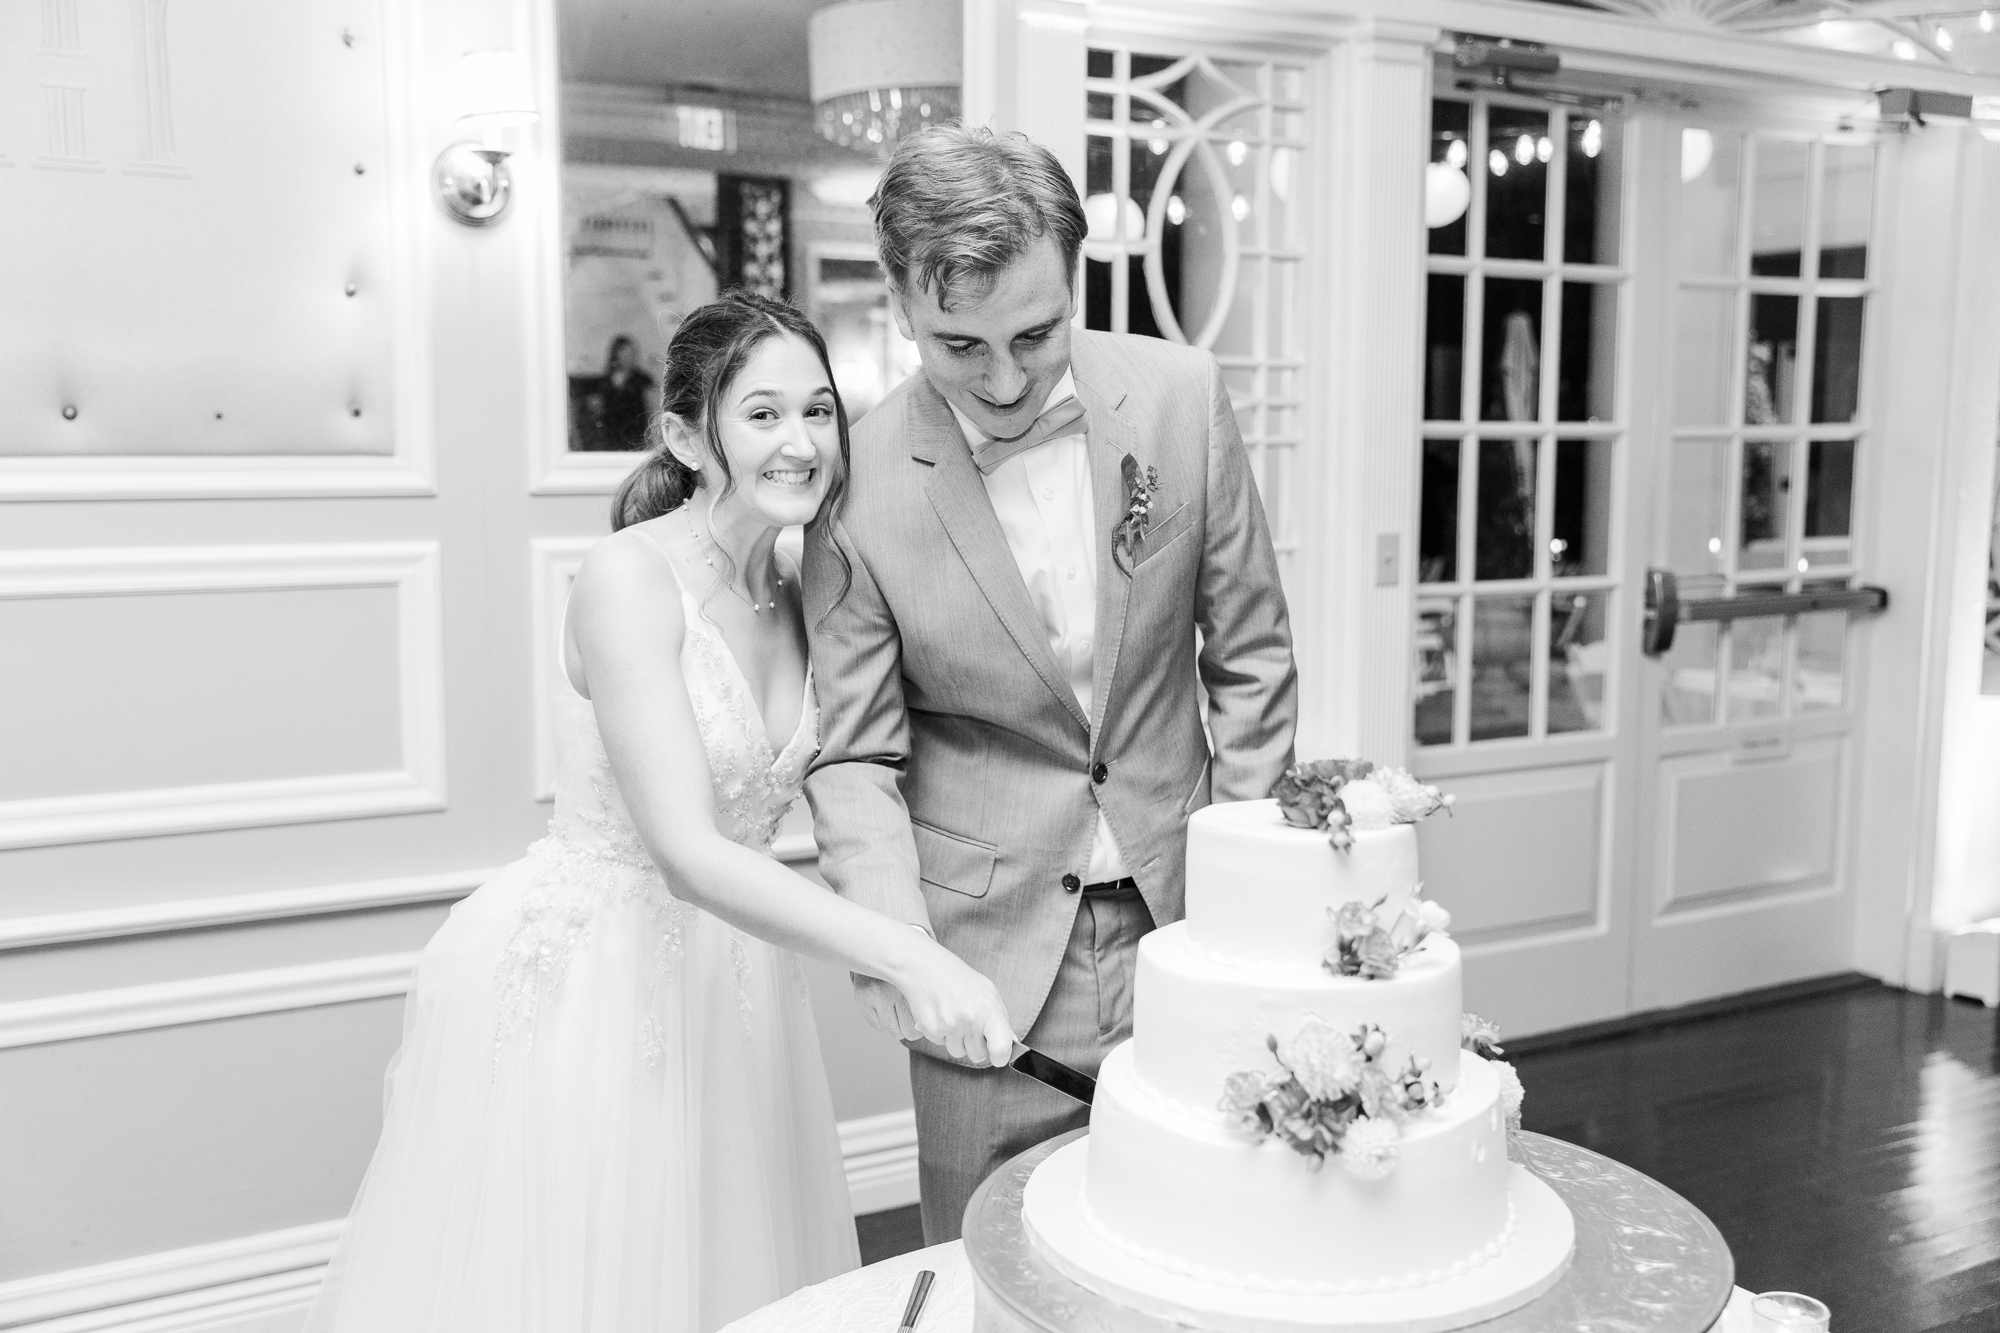 Stunning Wedding at Briarcliff Manor in Summertime